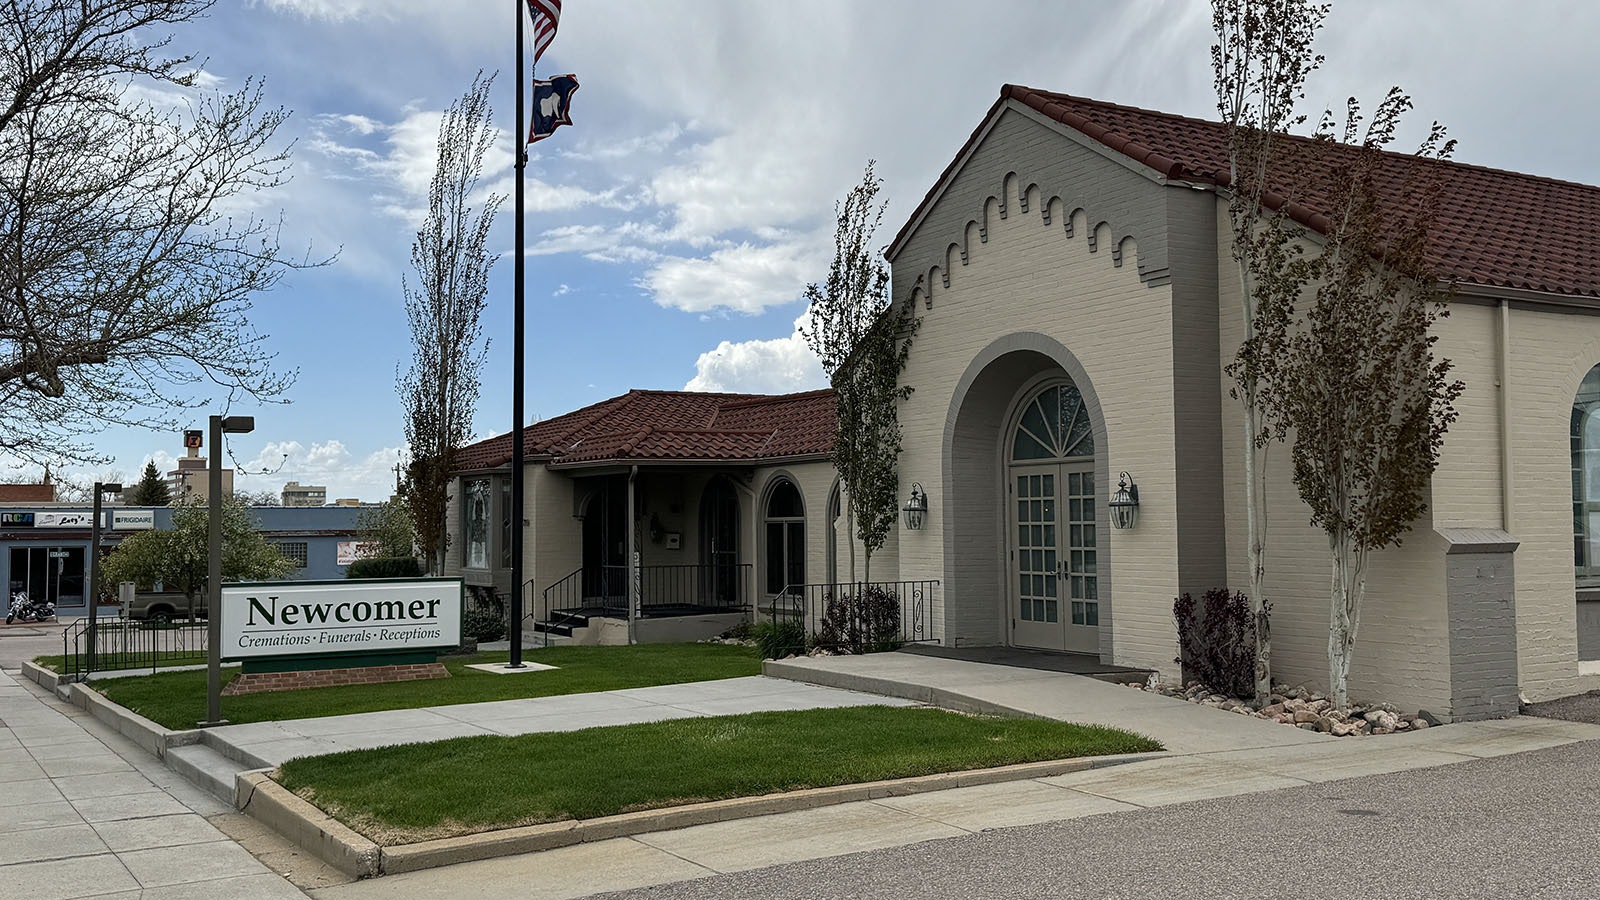 The Newcomer Cremations, Funerals and Receptions building at 710 E. 2nd St., in Casper that is one of two funeral companies to handle the “indigent” cremated remains for Natrona County.